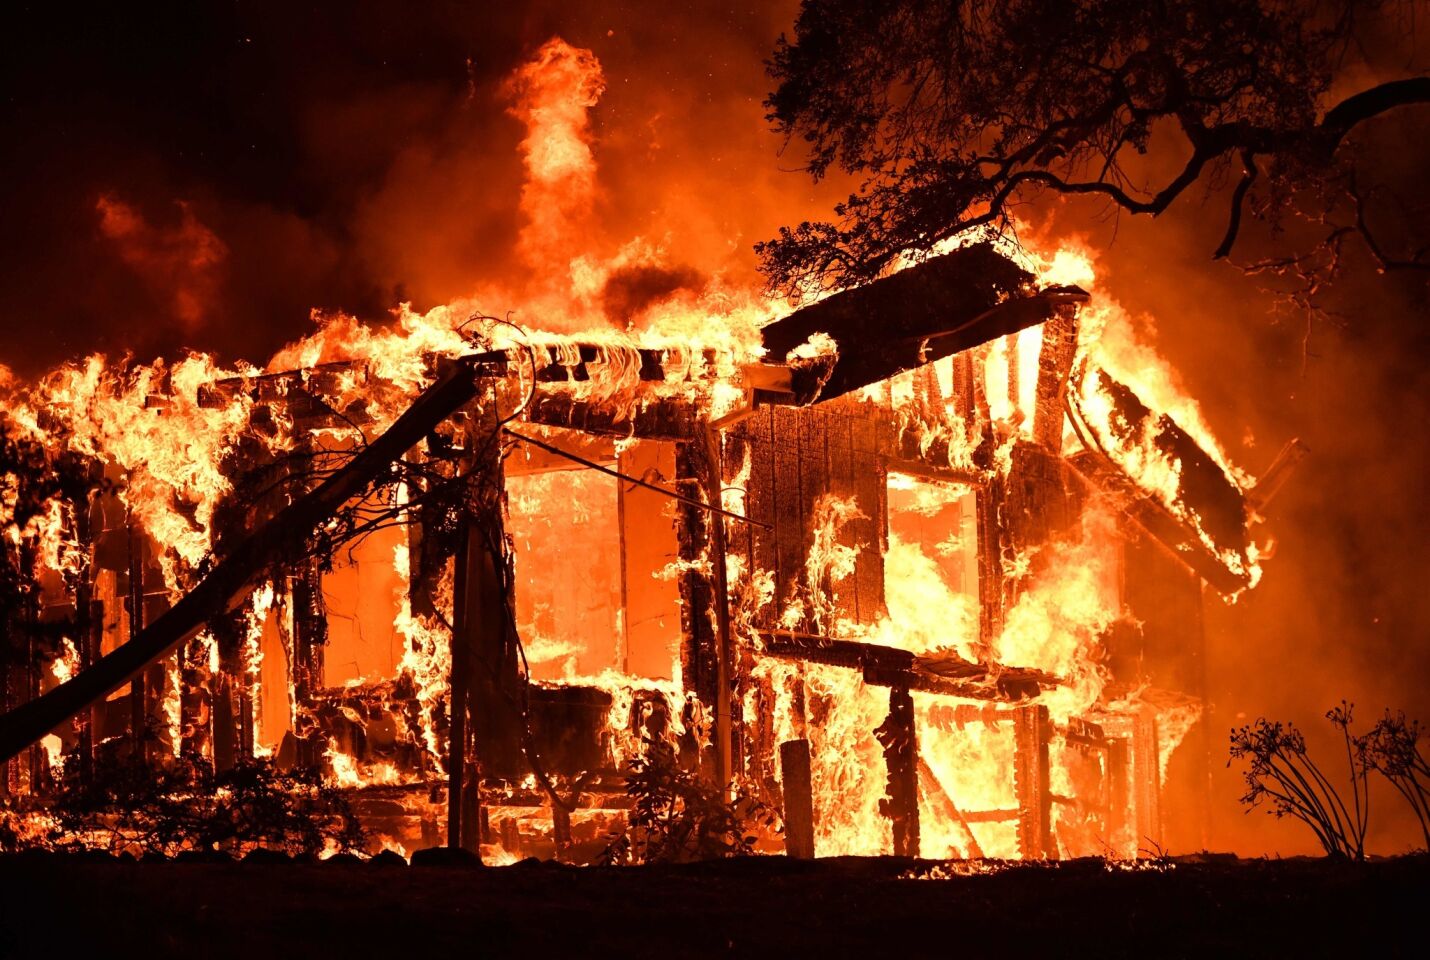 Flames ravage a home in the Napa wine region in California.